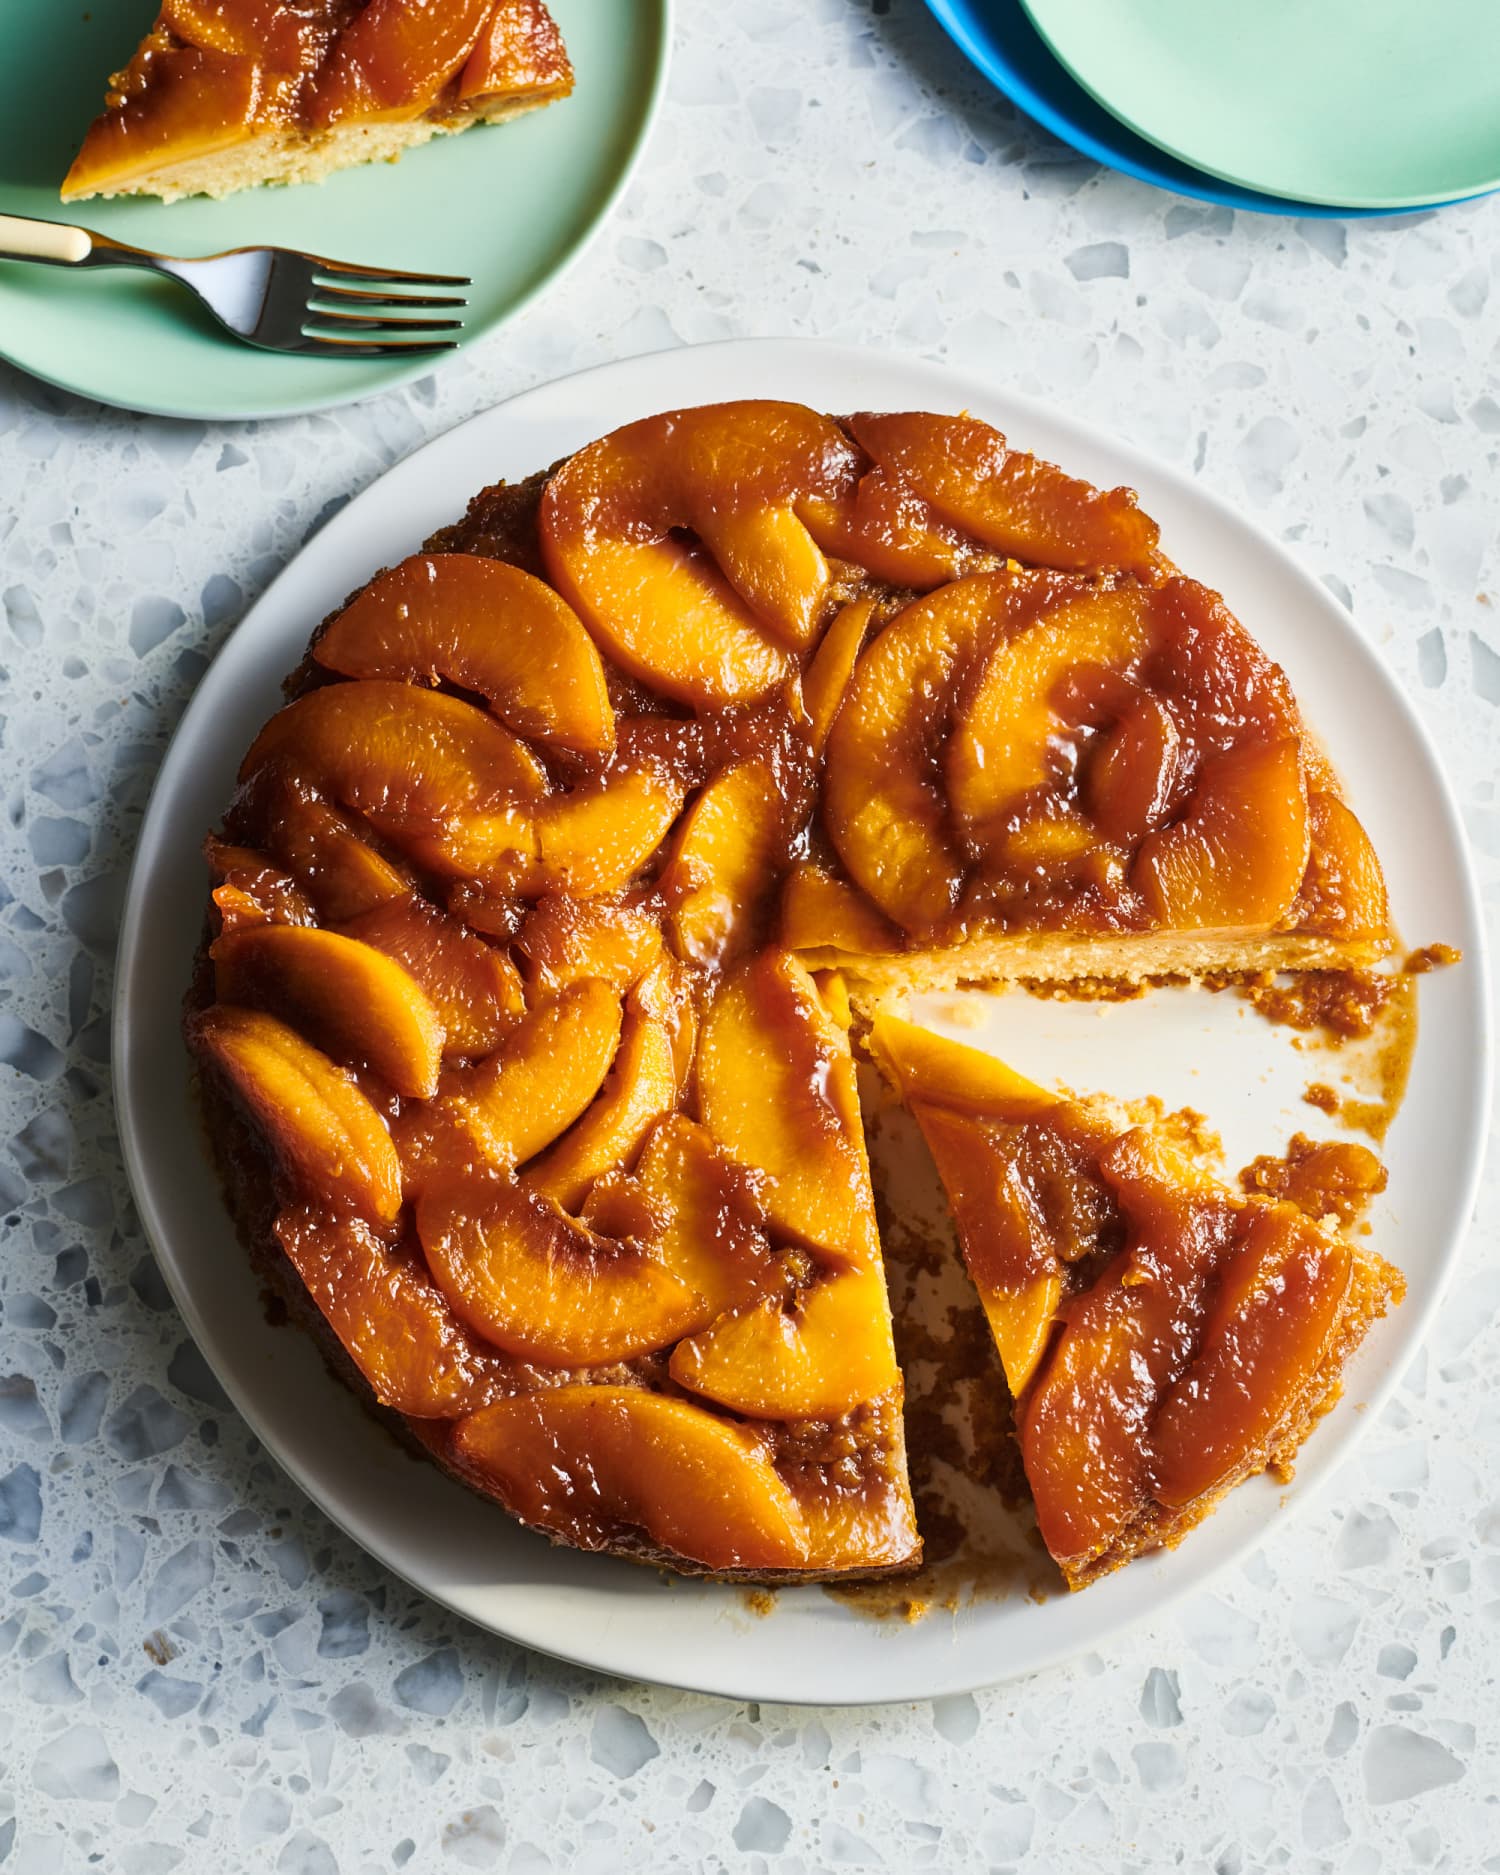 This Fluffy Peach-Upside Down Cake Deserves the Top Spot on Your Summer Baking List